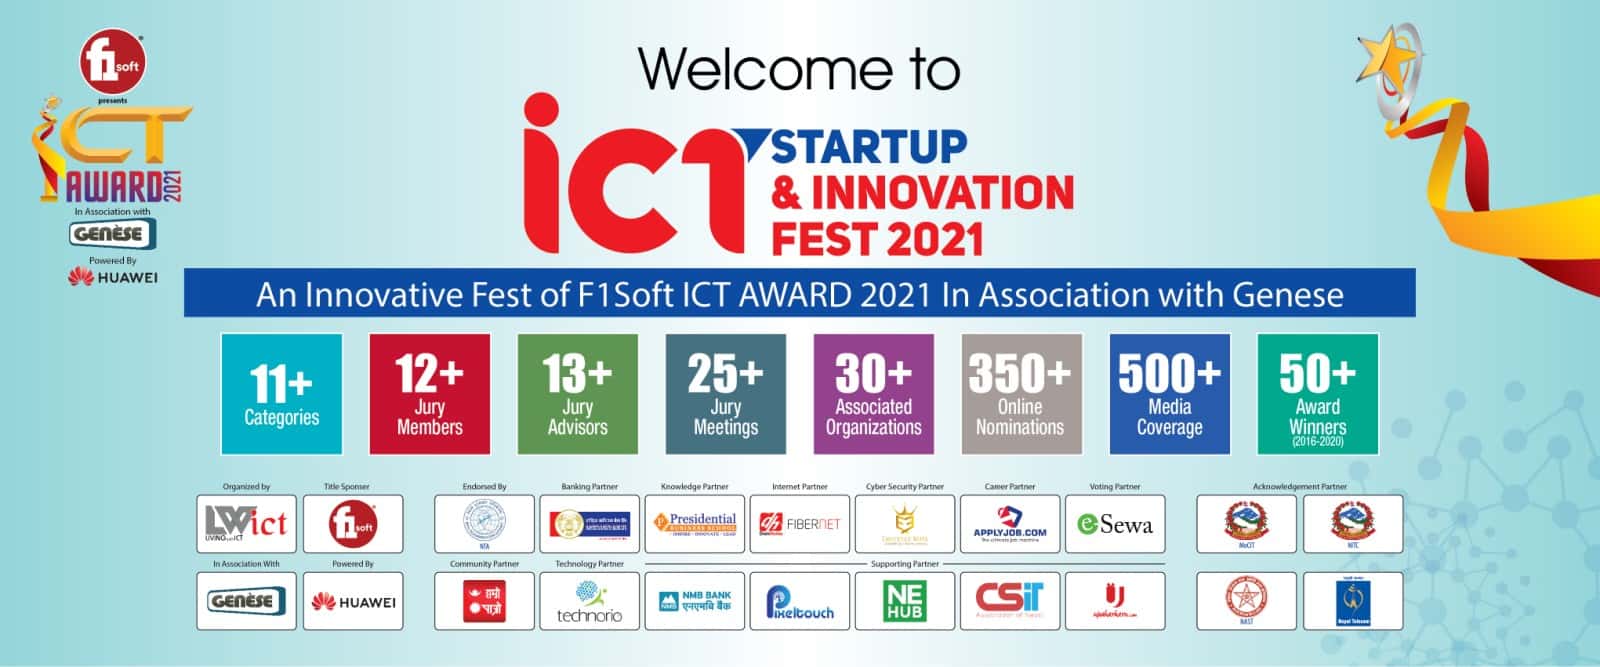 ICT Startup and Innovation Fest 2021